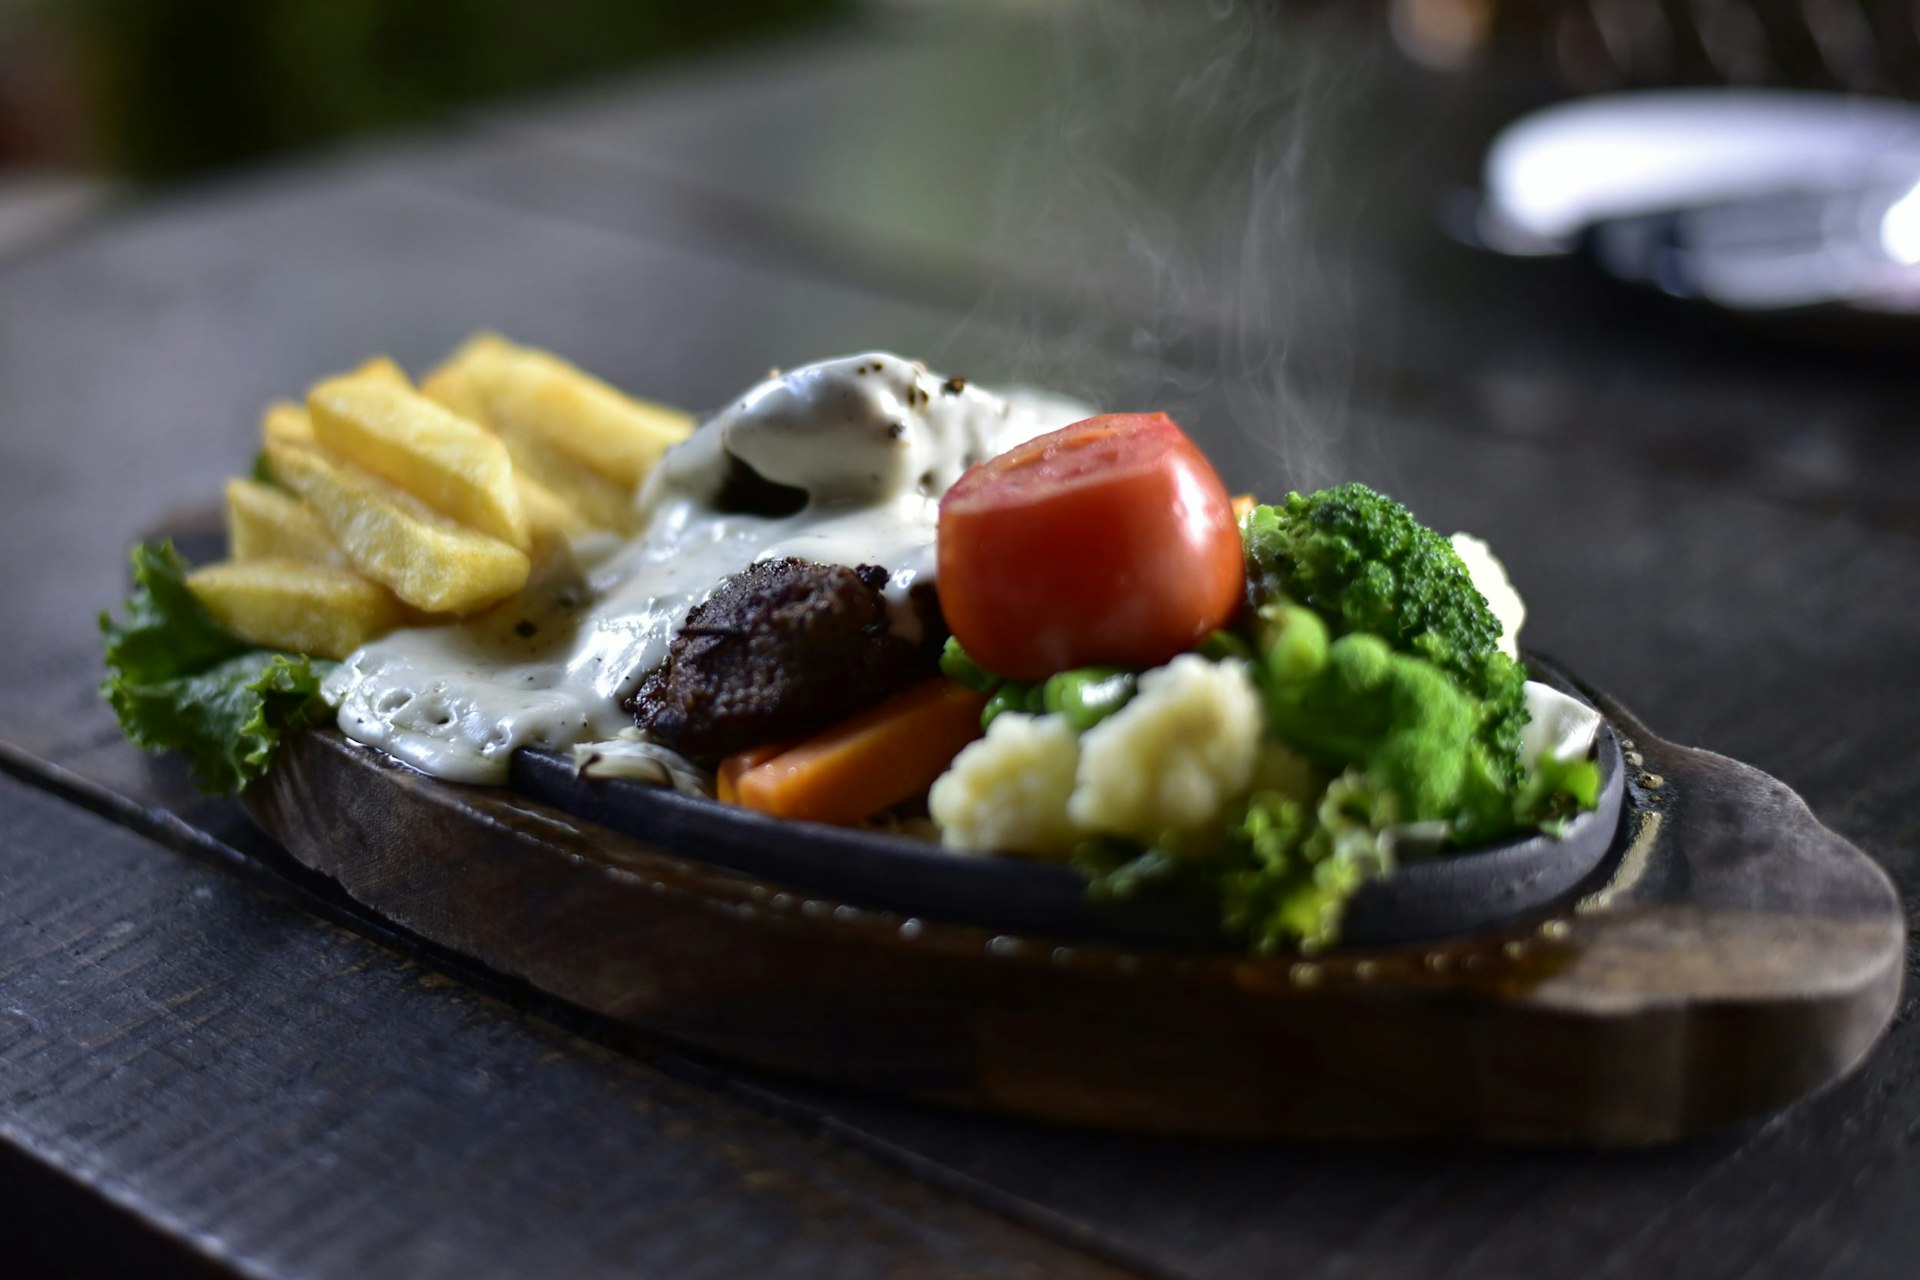 Steaks in Nepal are serve sizzler-style, on a heated cast-iron platter © Sirin Meesorn/Getty Images